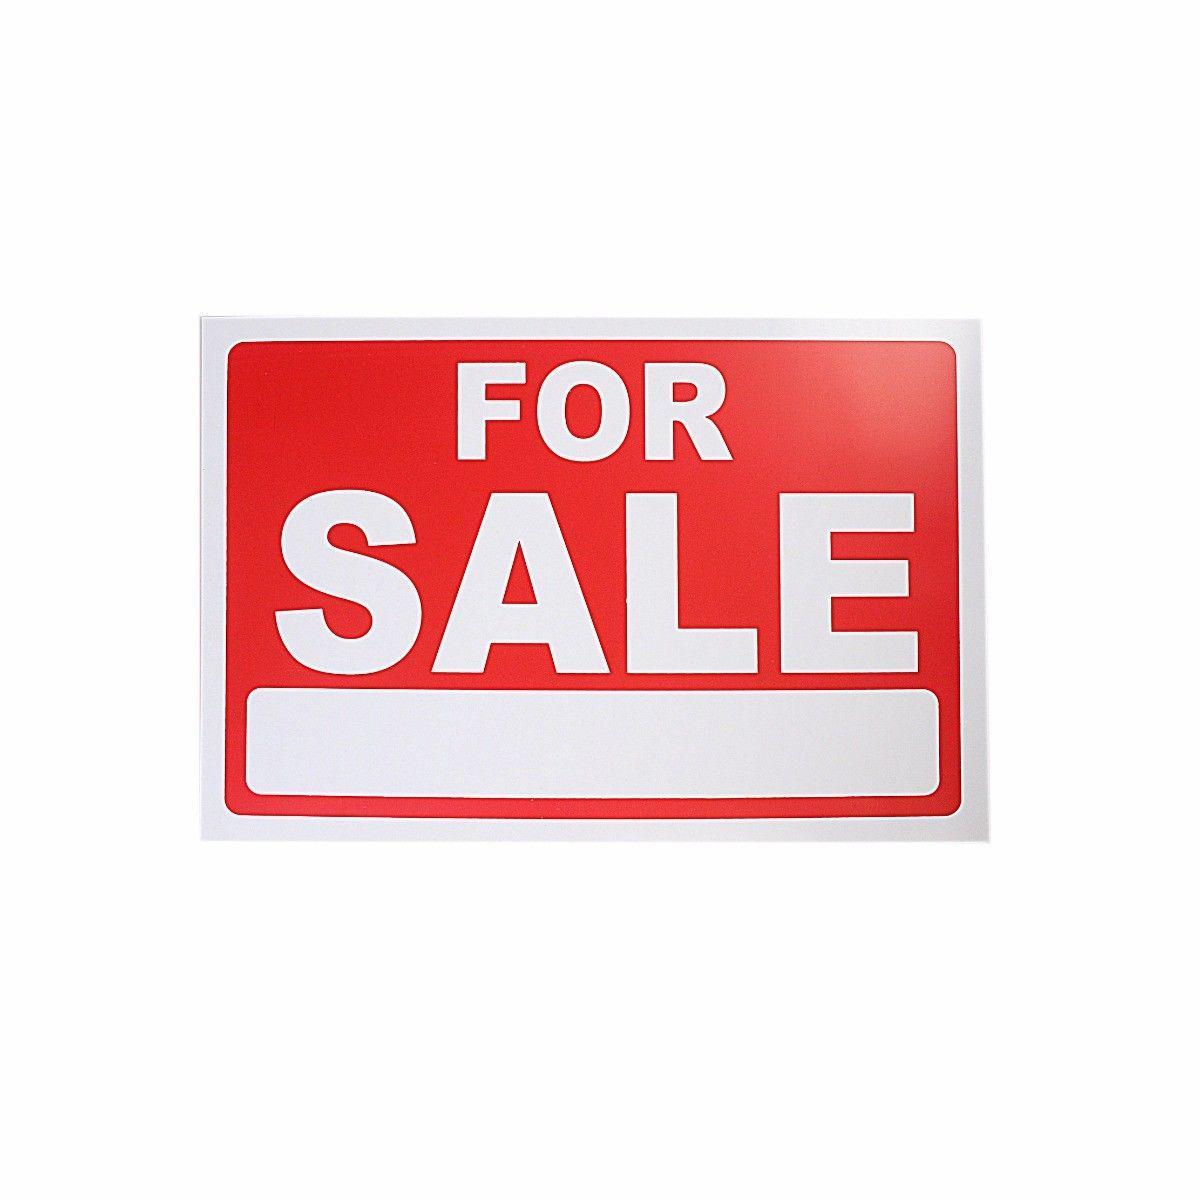 Shop Sign 'FOR SALE' Advertising Sale Items Sticker Adhesive 30cm x 20cm  4905 (Large Letter Rate)